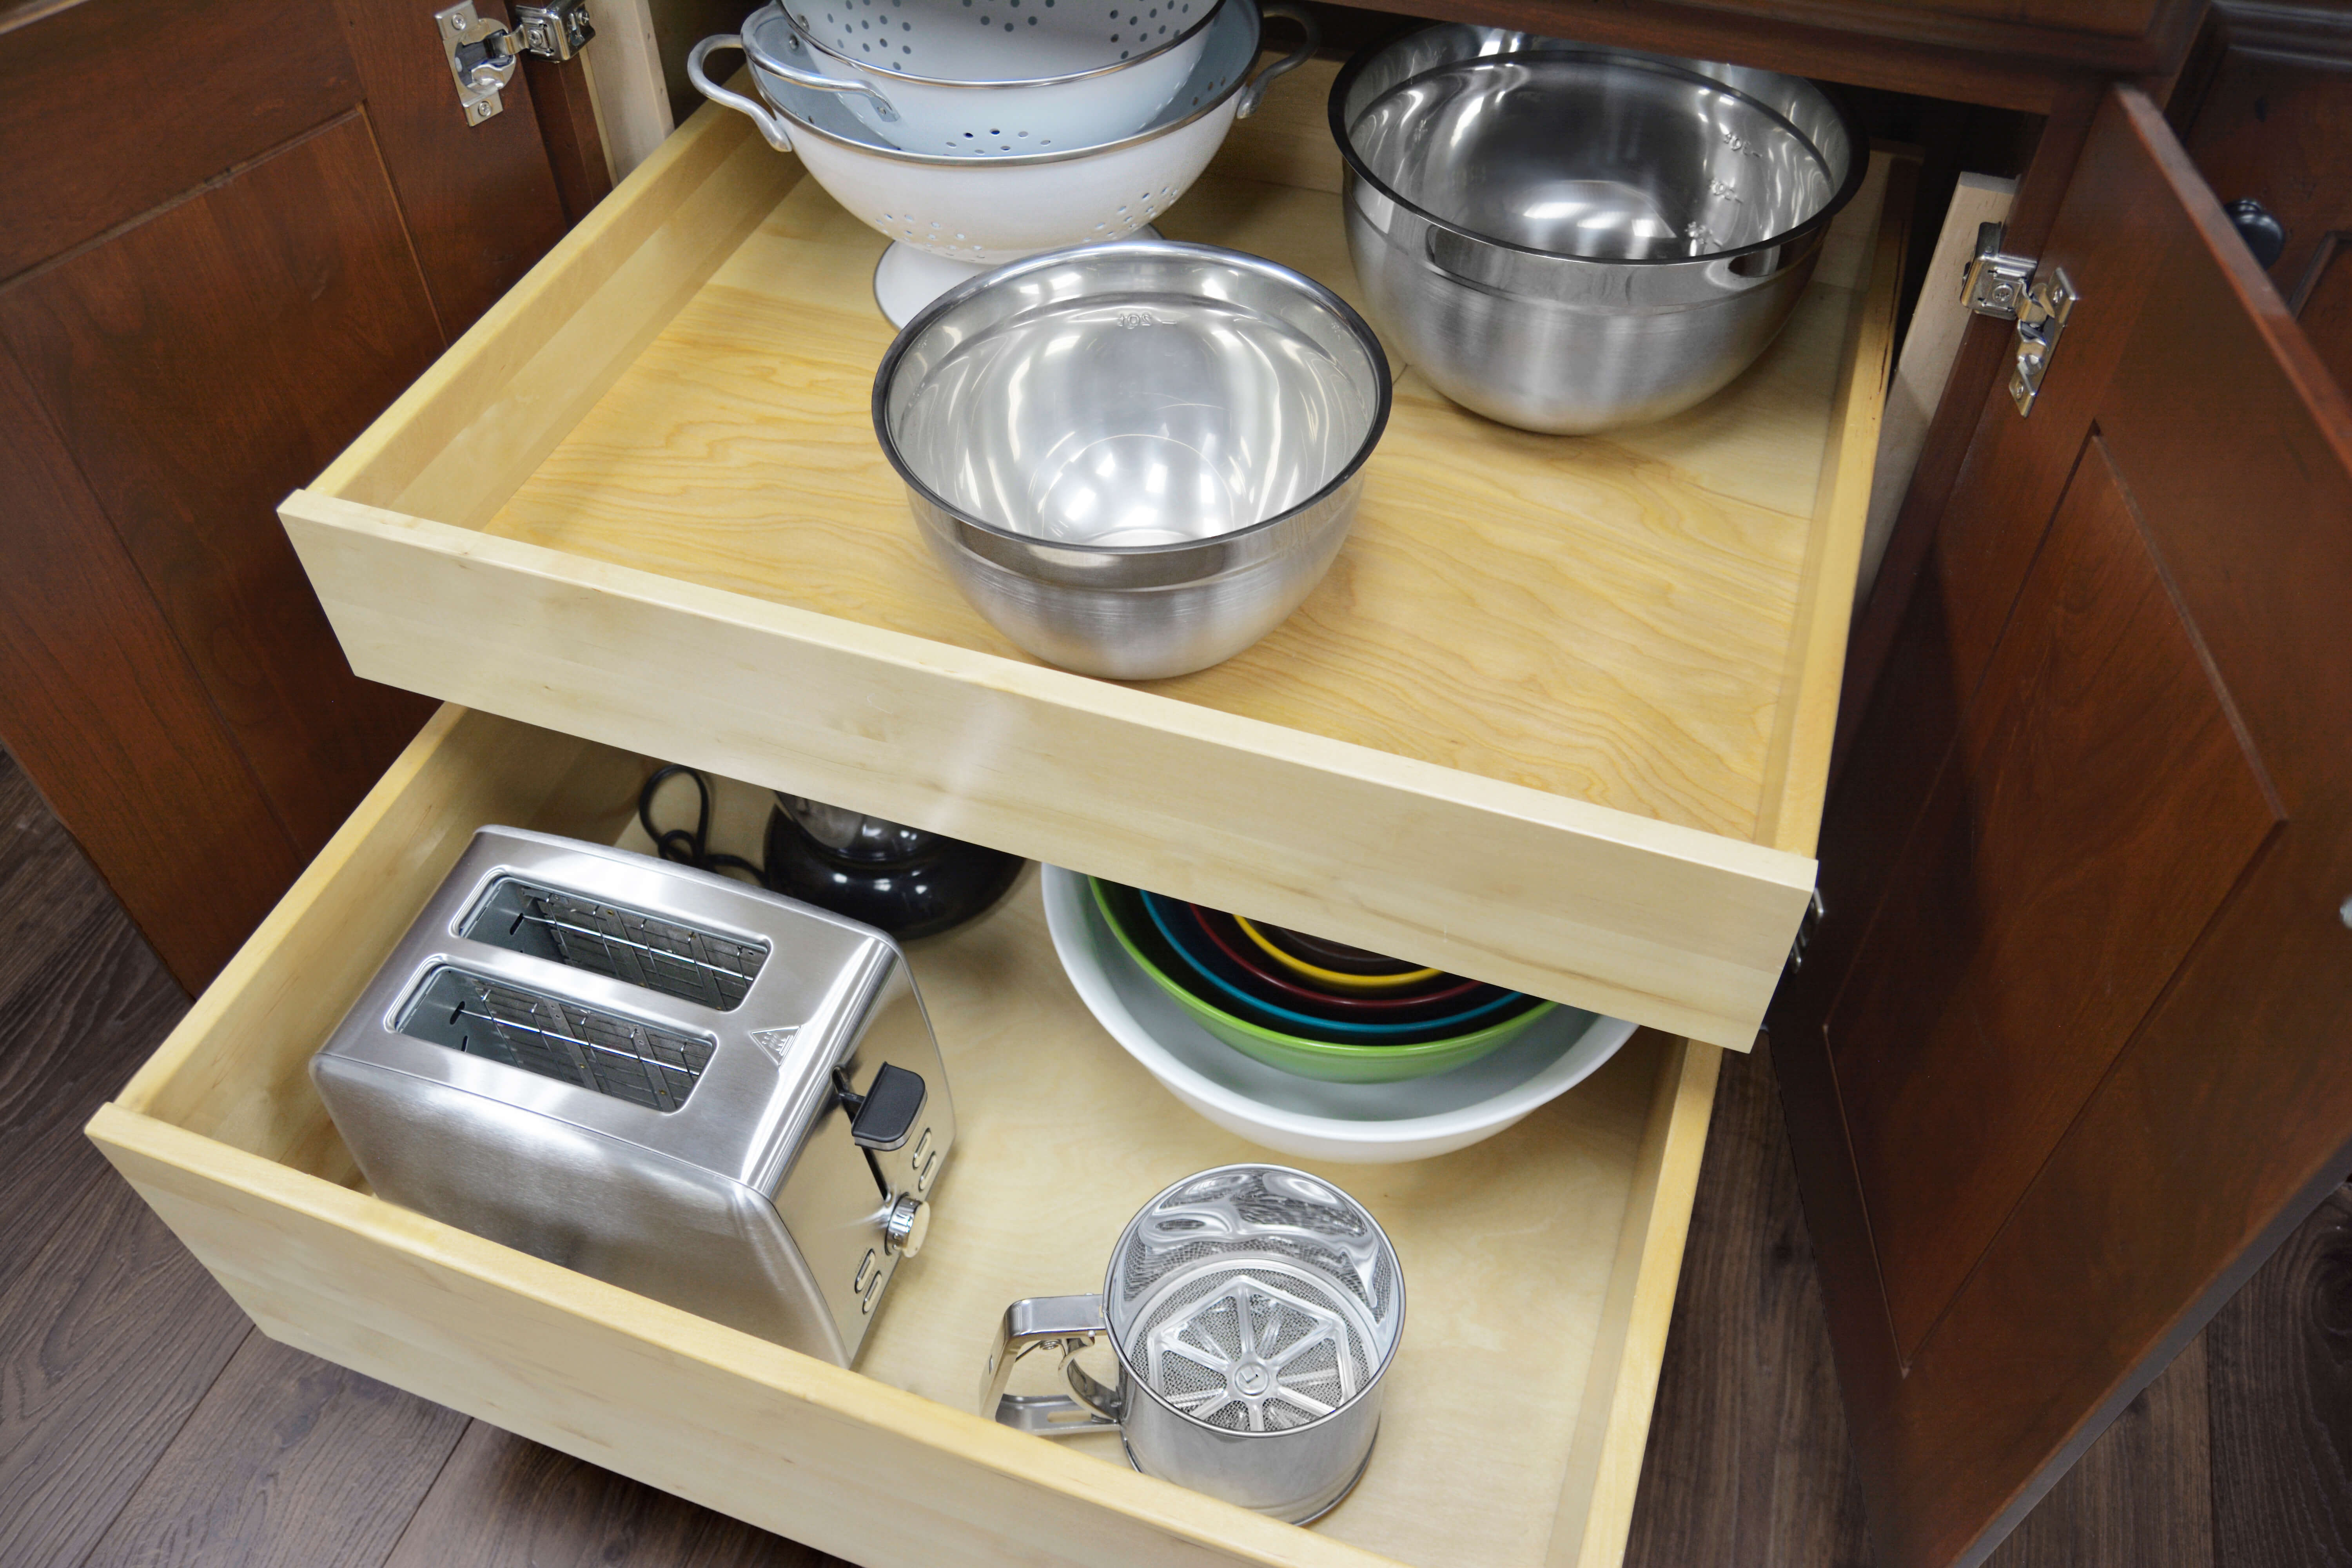 A base kitchen cabinet with two roll-out shelves.